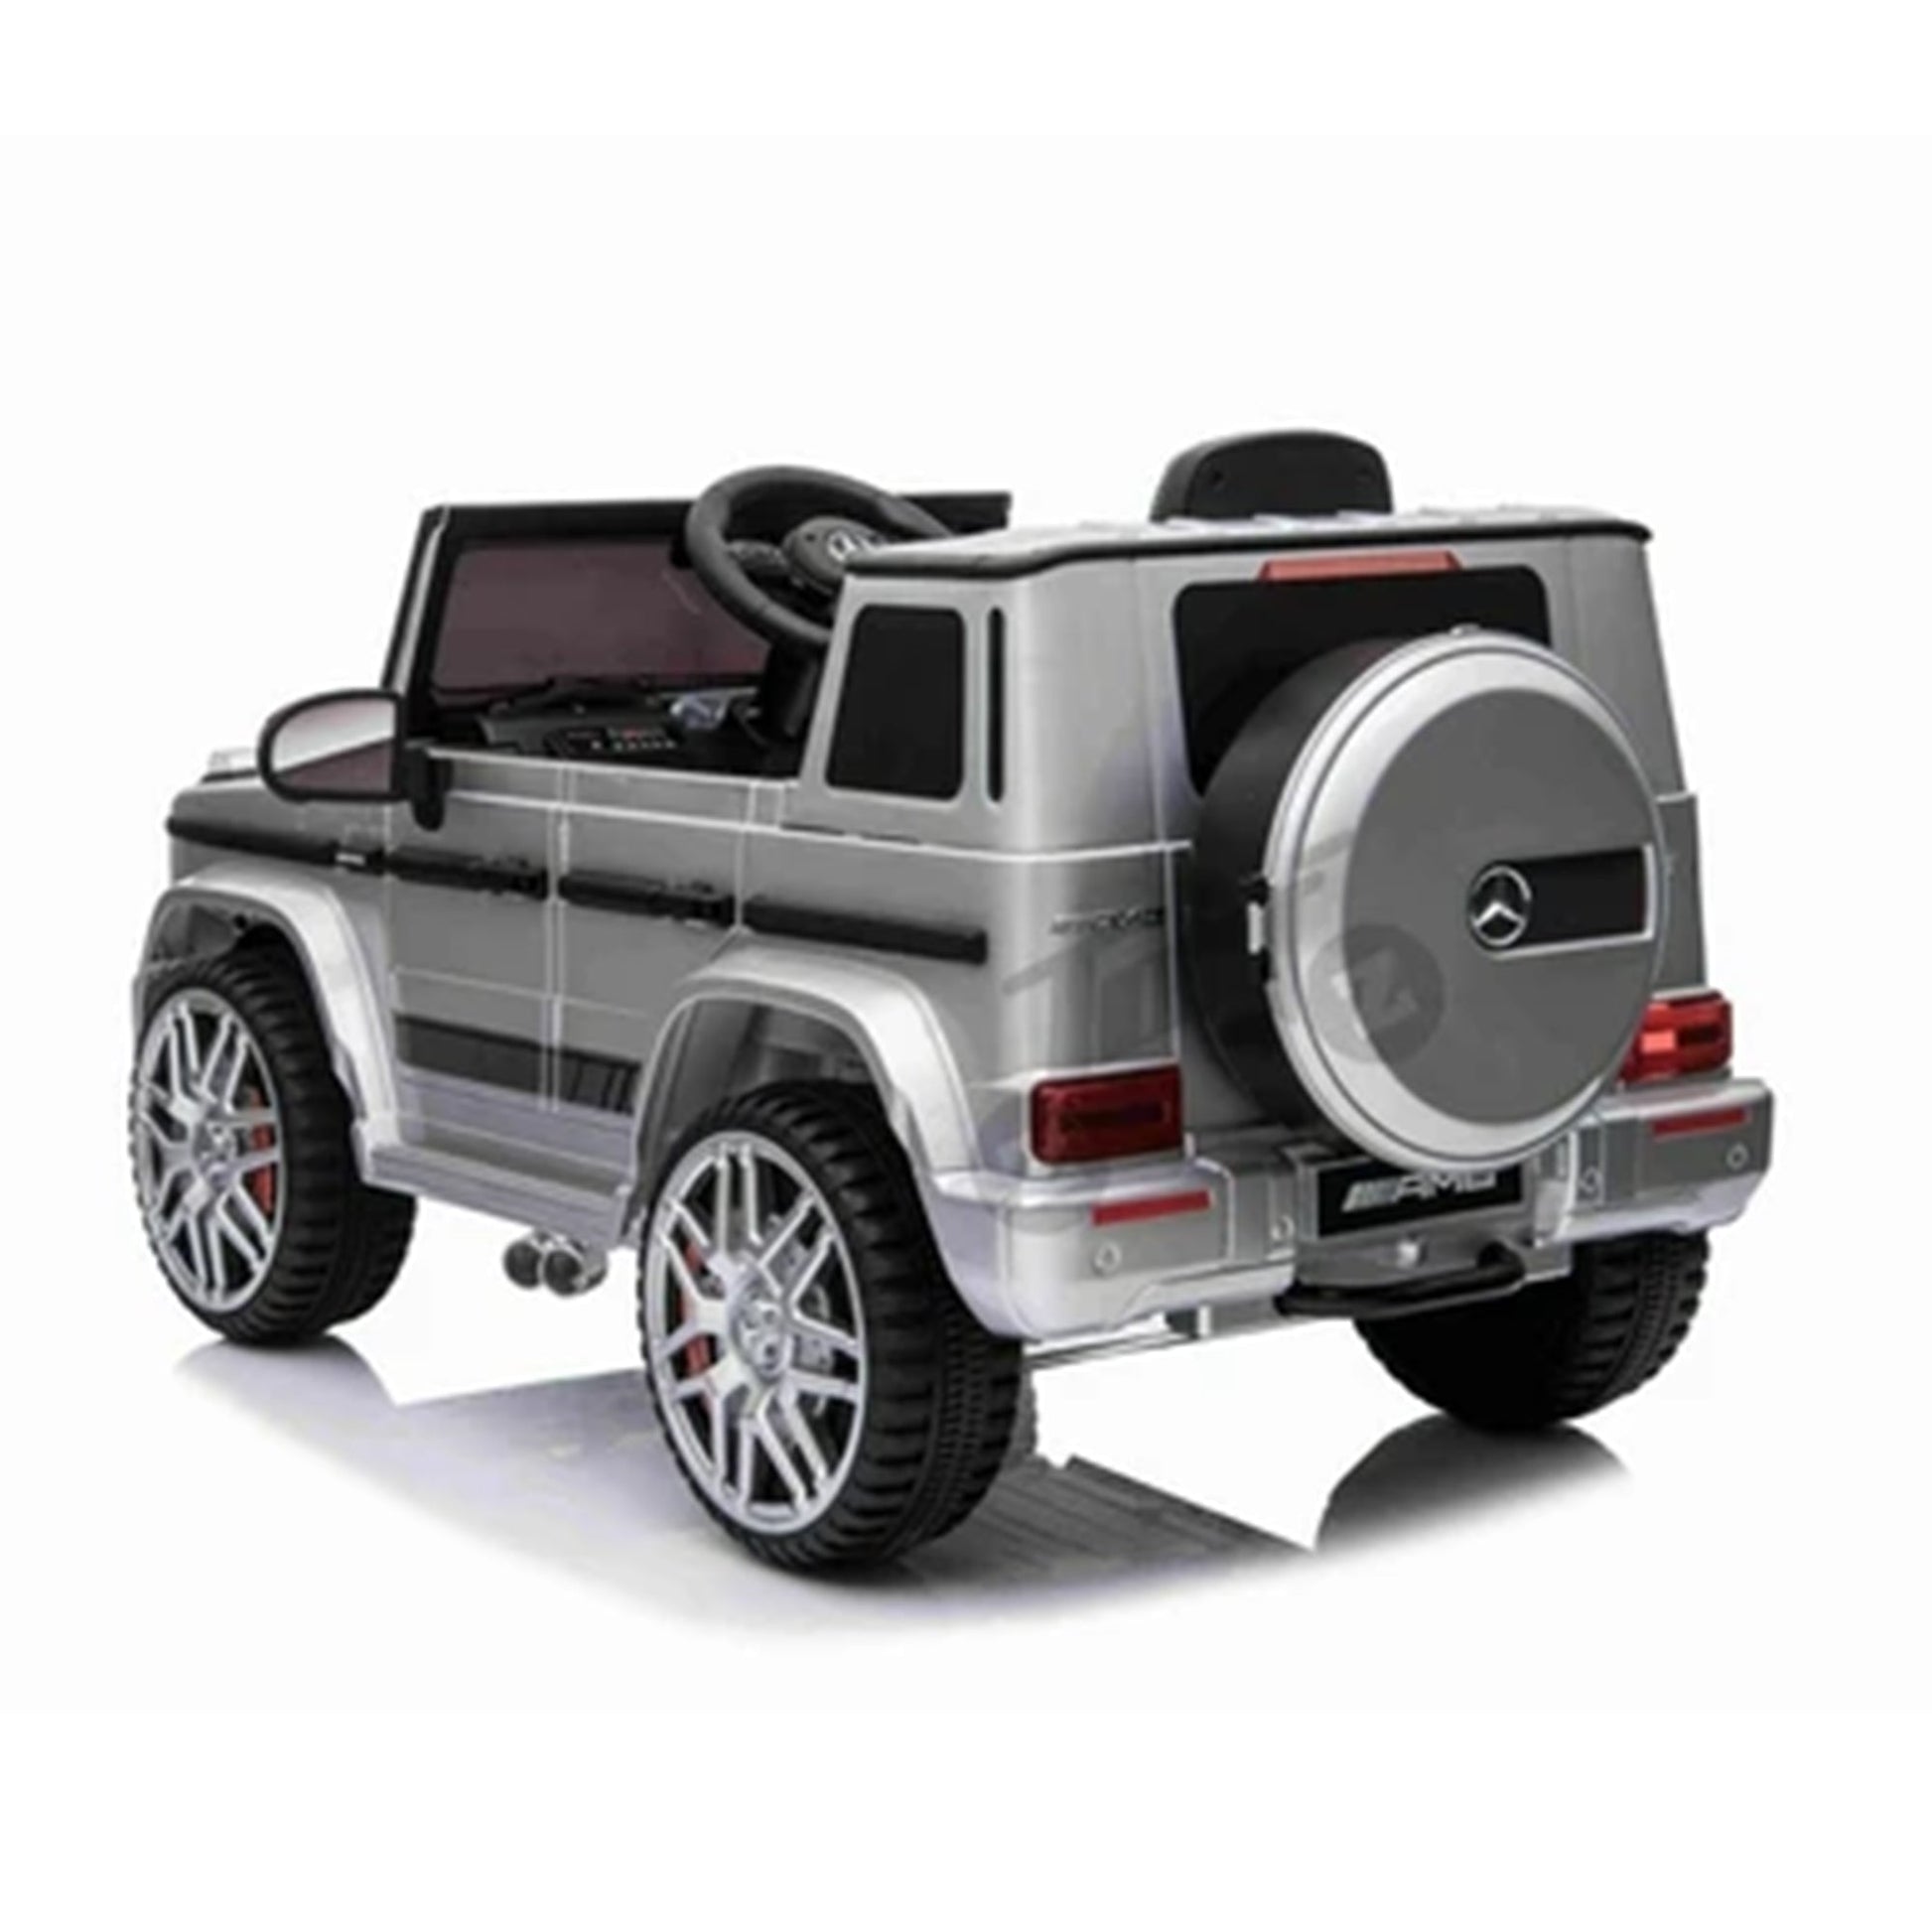 Alt text: A silver Mercedes-Benz G63 AMG 12V electric ride-on car for kids with remote control functionality.